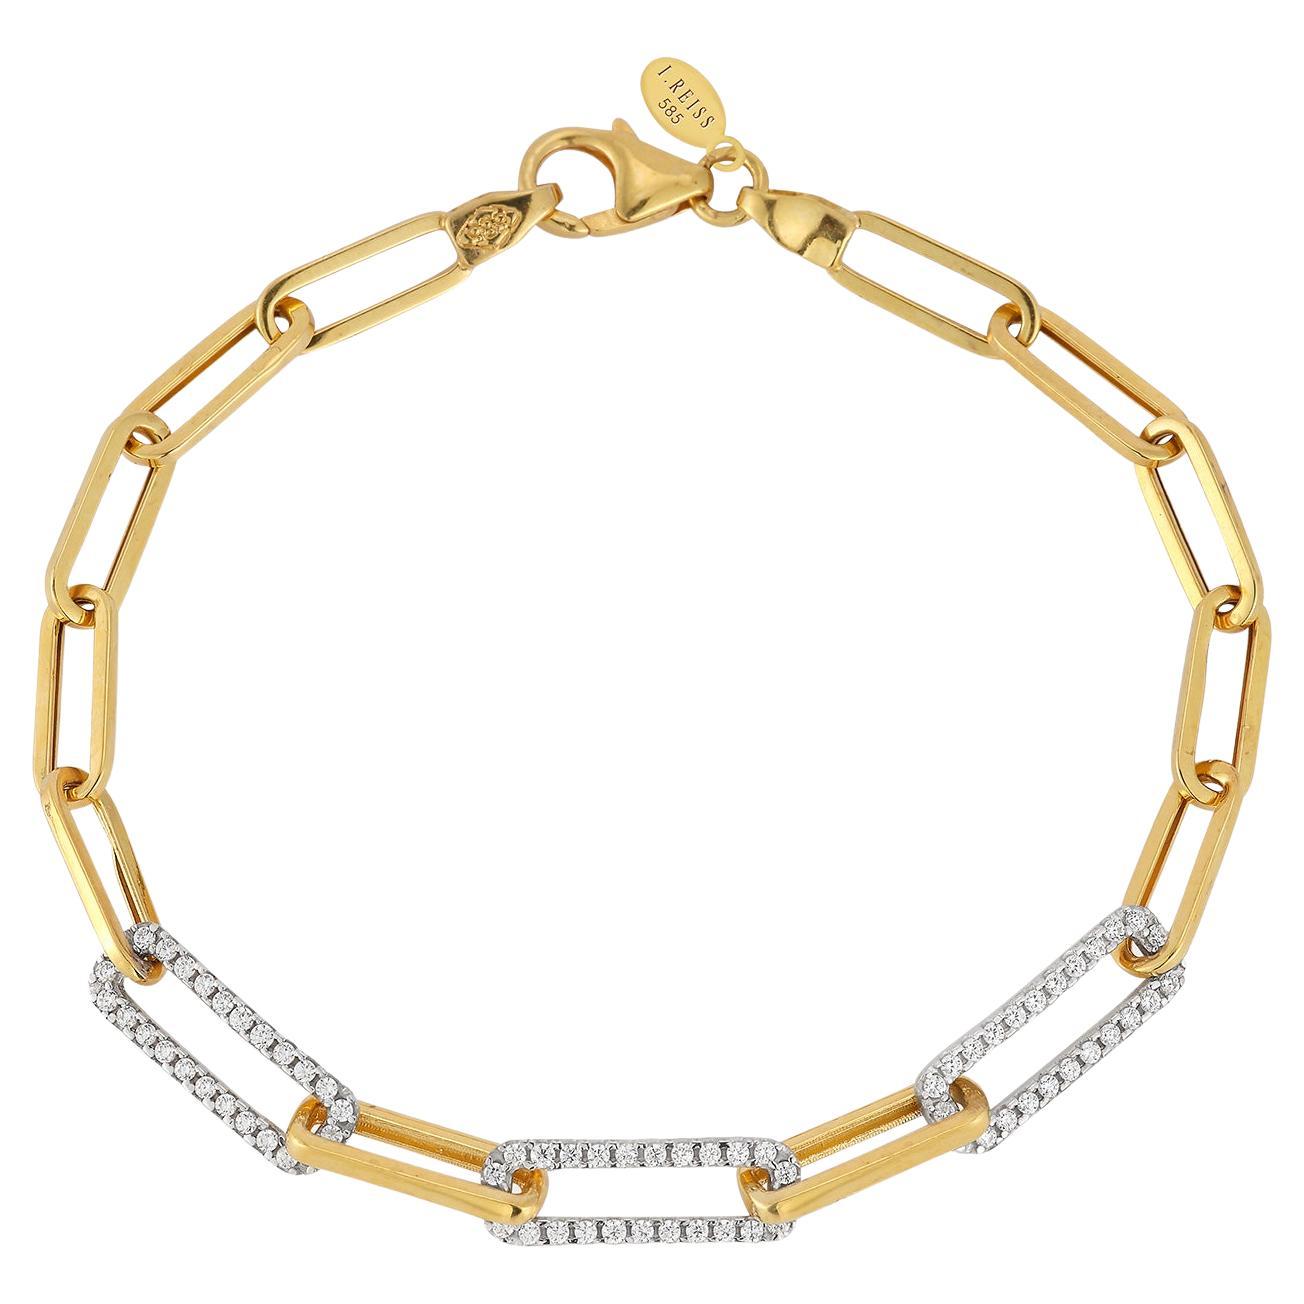 Craftted 14K Yellow Gold Open Link Bracelet